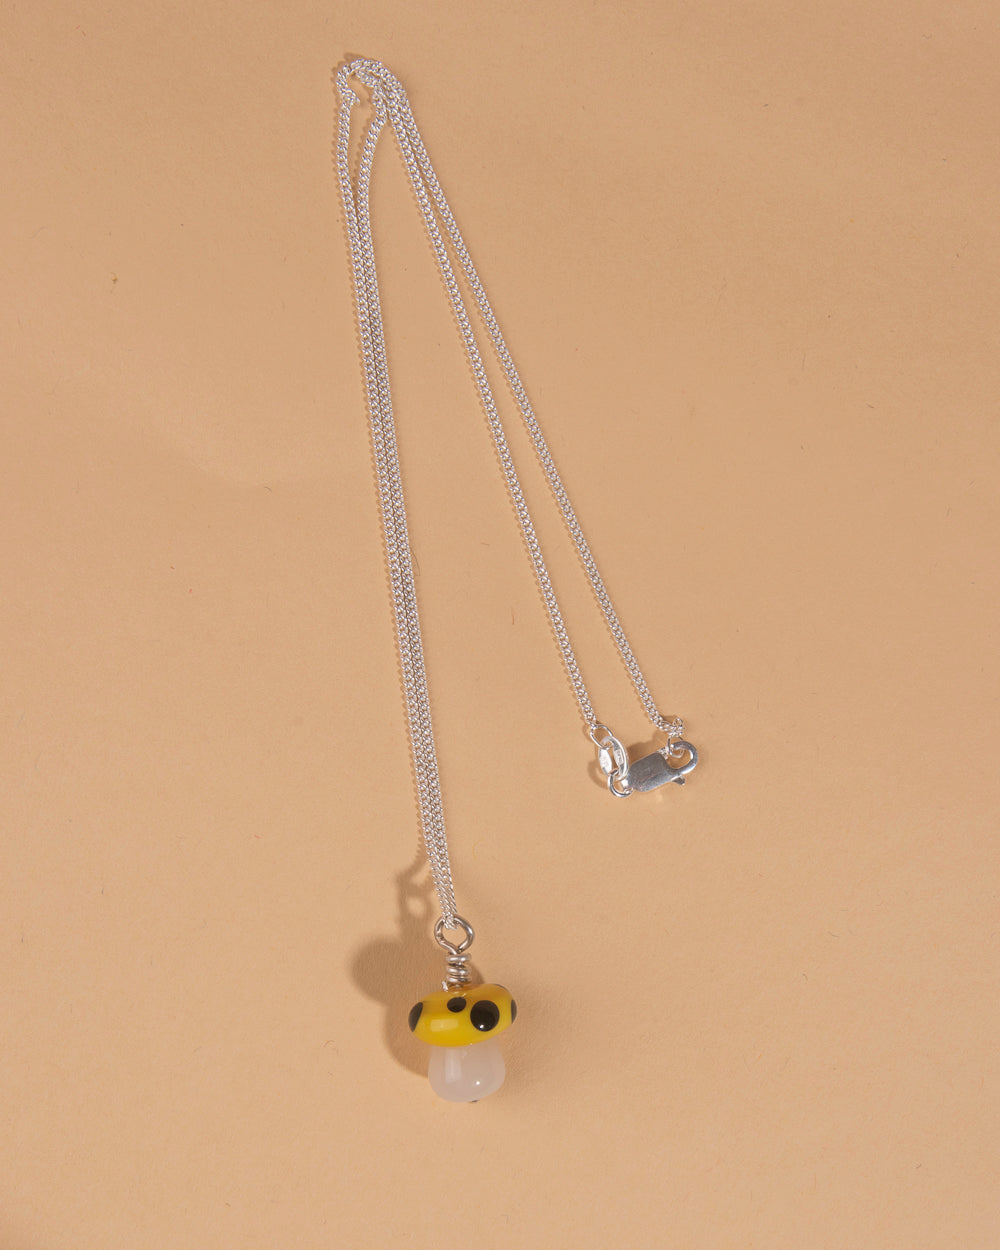 Glass Bead Mushroom Necklace – Yellow and Black